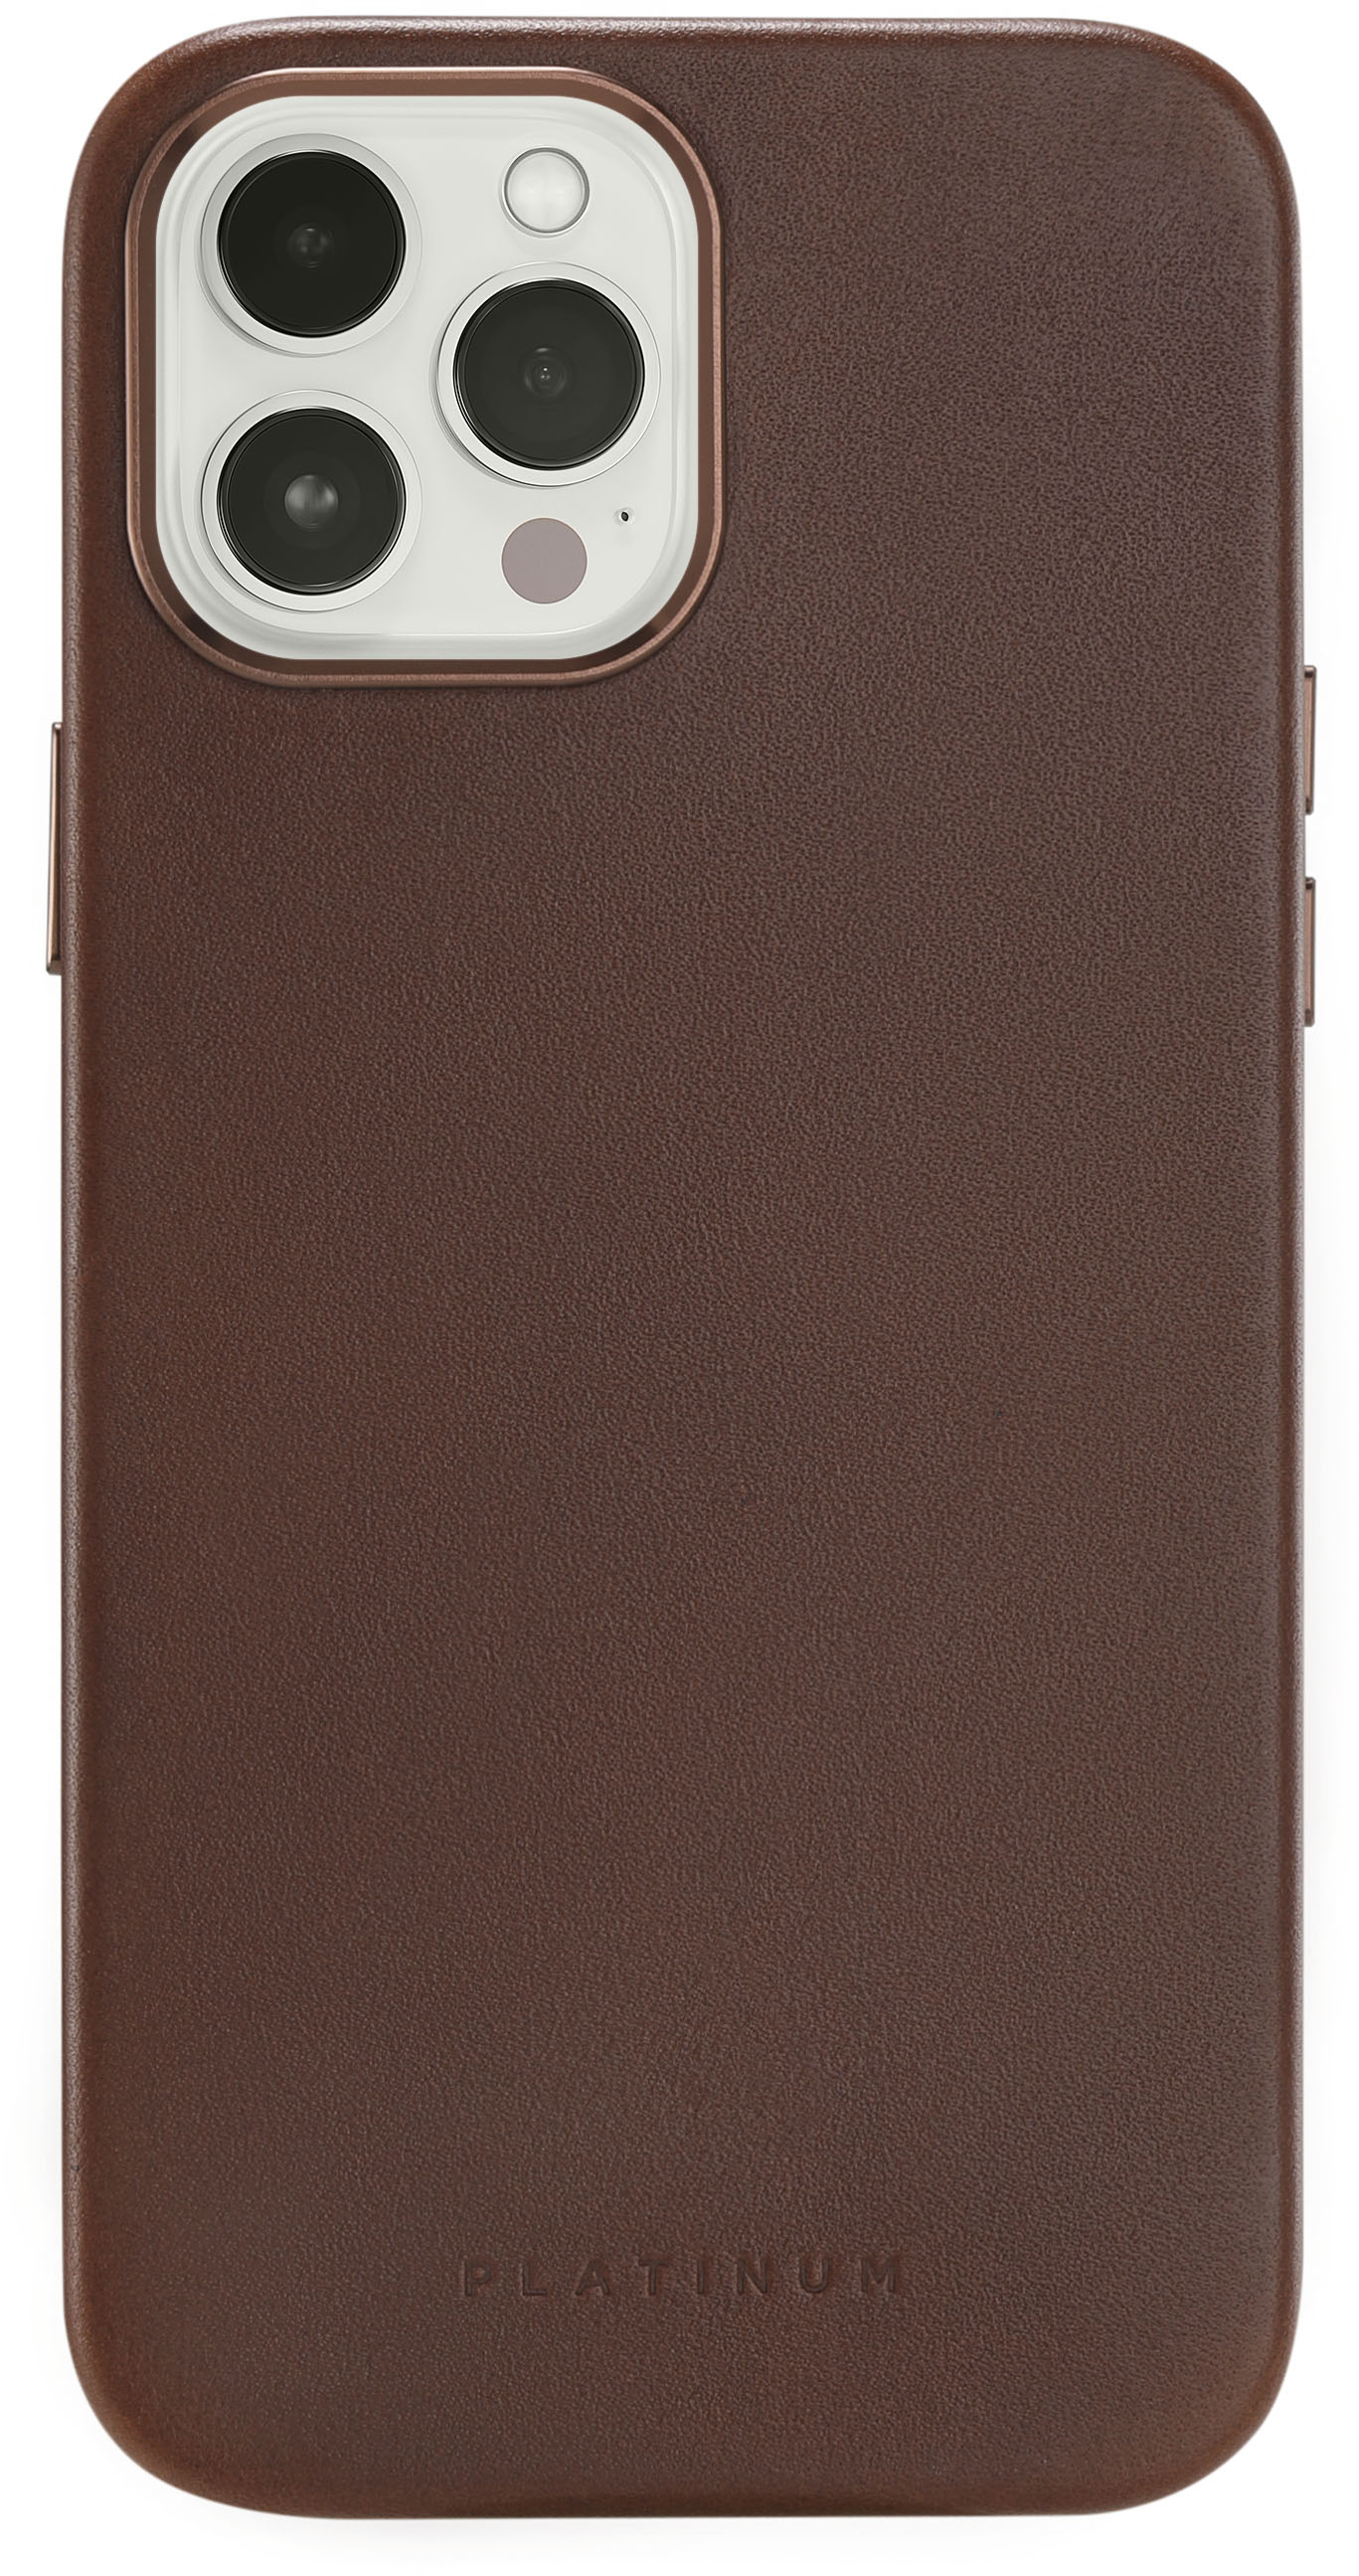 Platinum™ Horween Leather Case for iPhone 13 Pro Max and